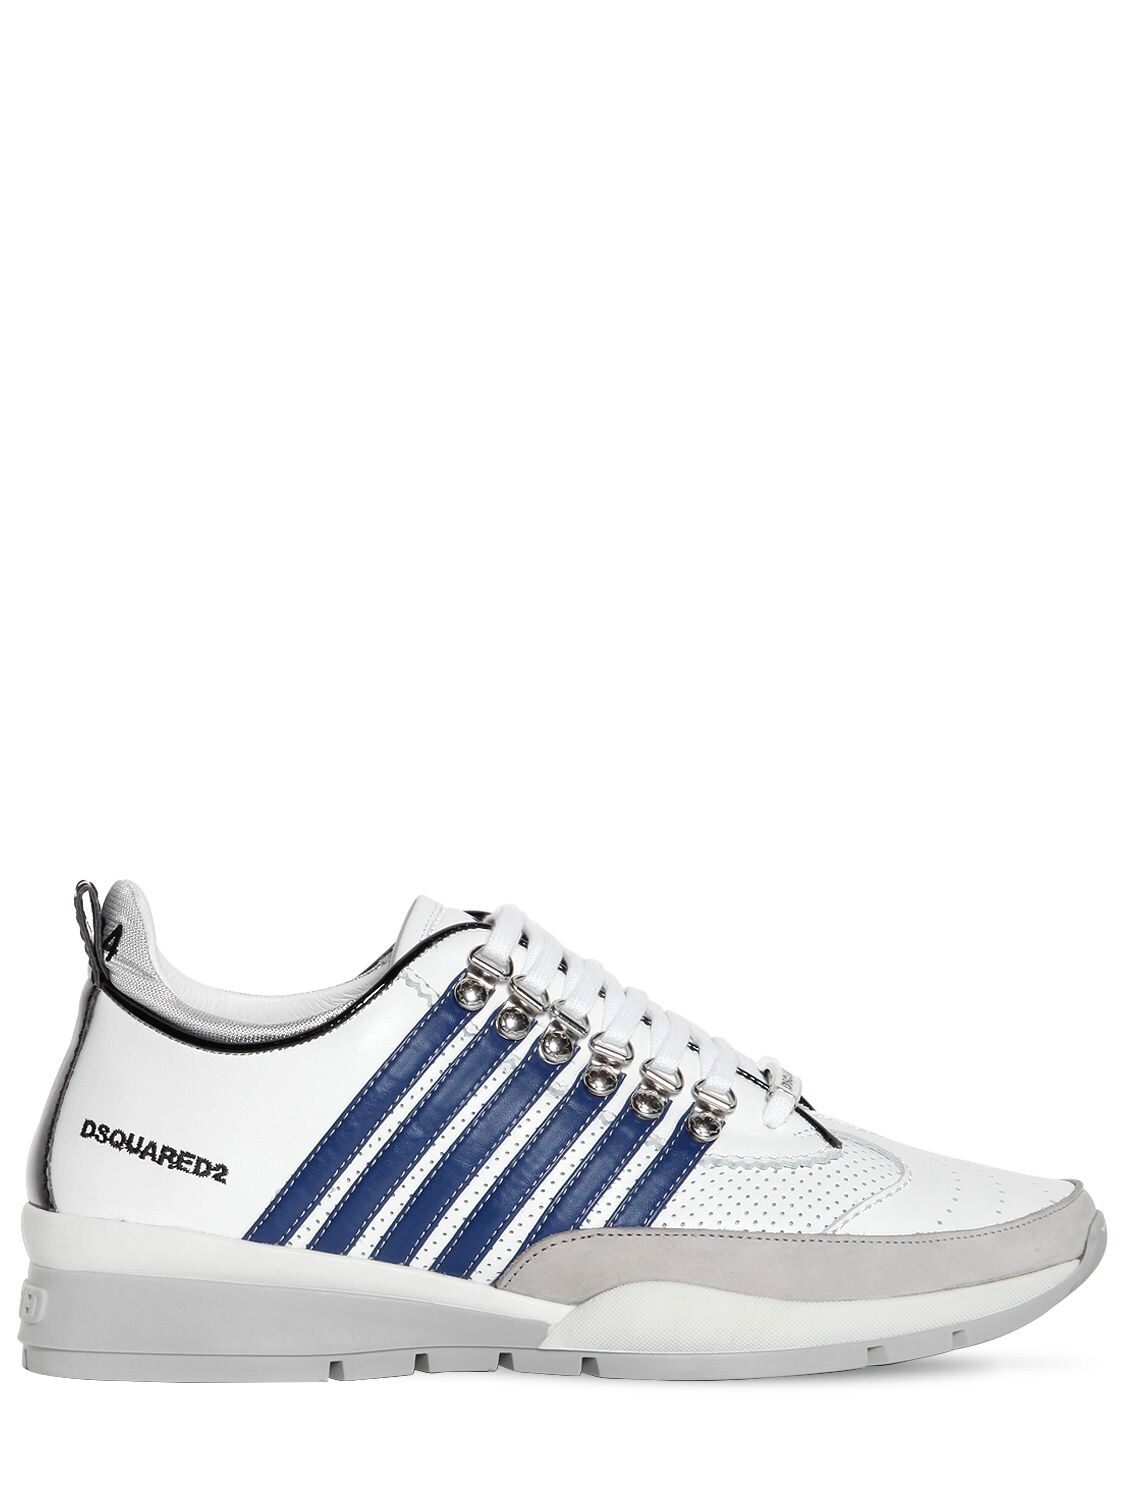 DSQUARED2 251 STRIPES LEATHER LOW TOP trainers,71I075013-TTMYOA2